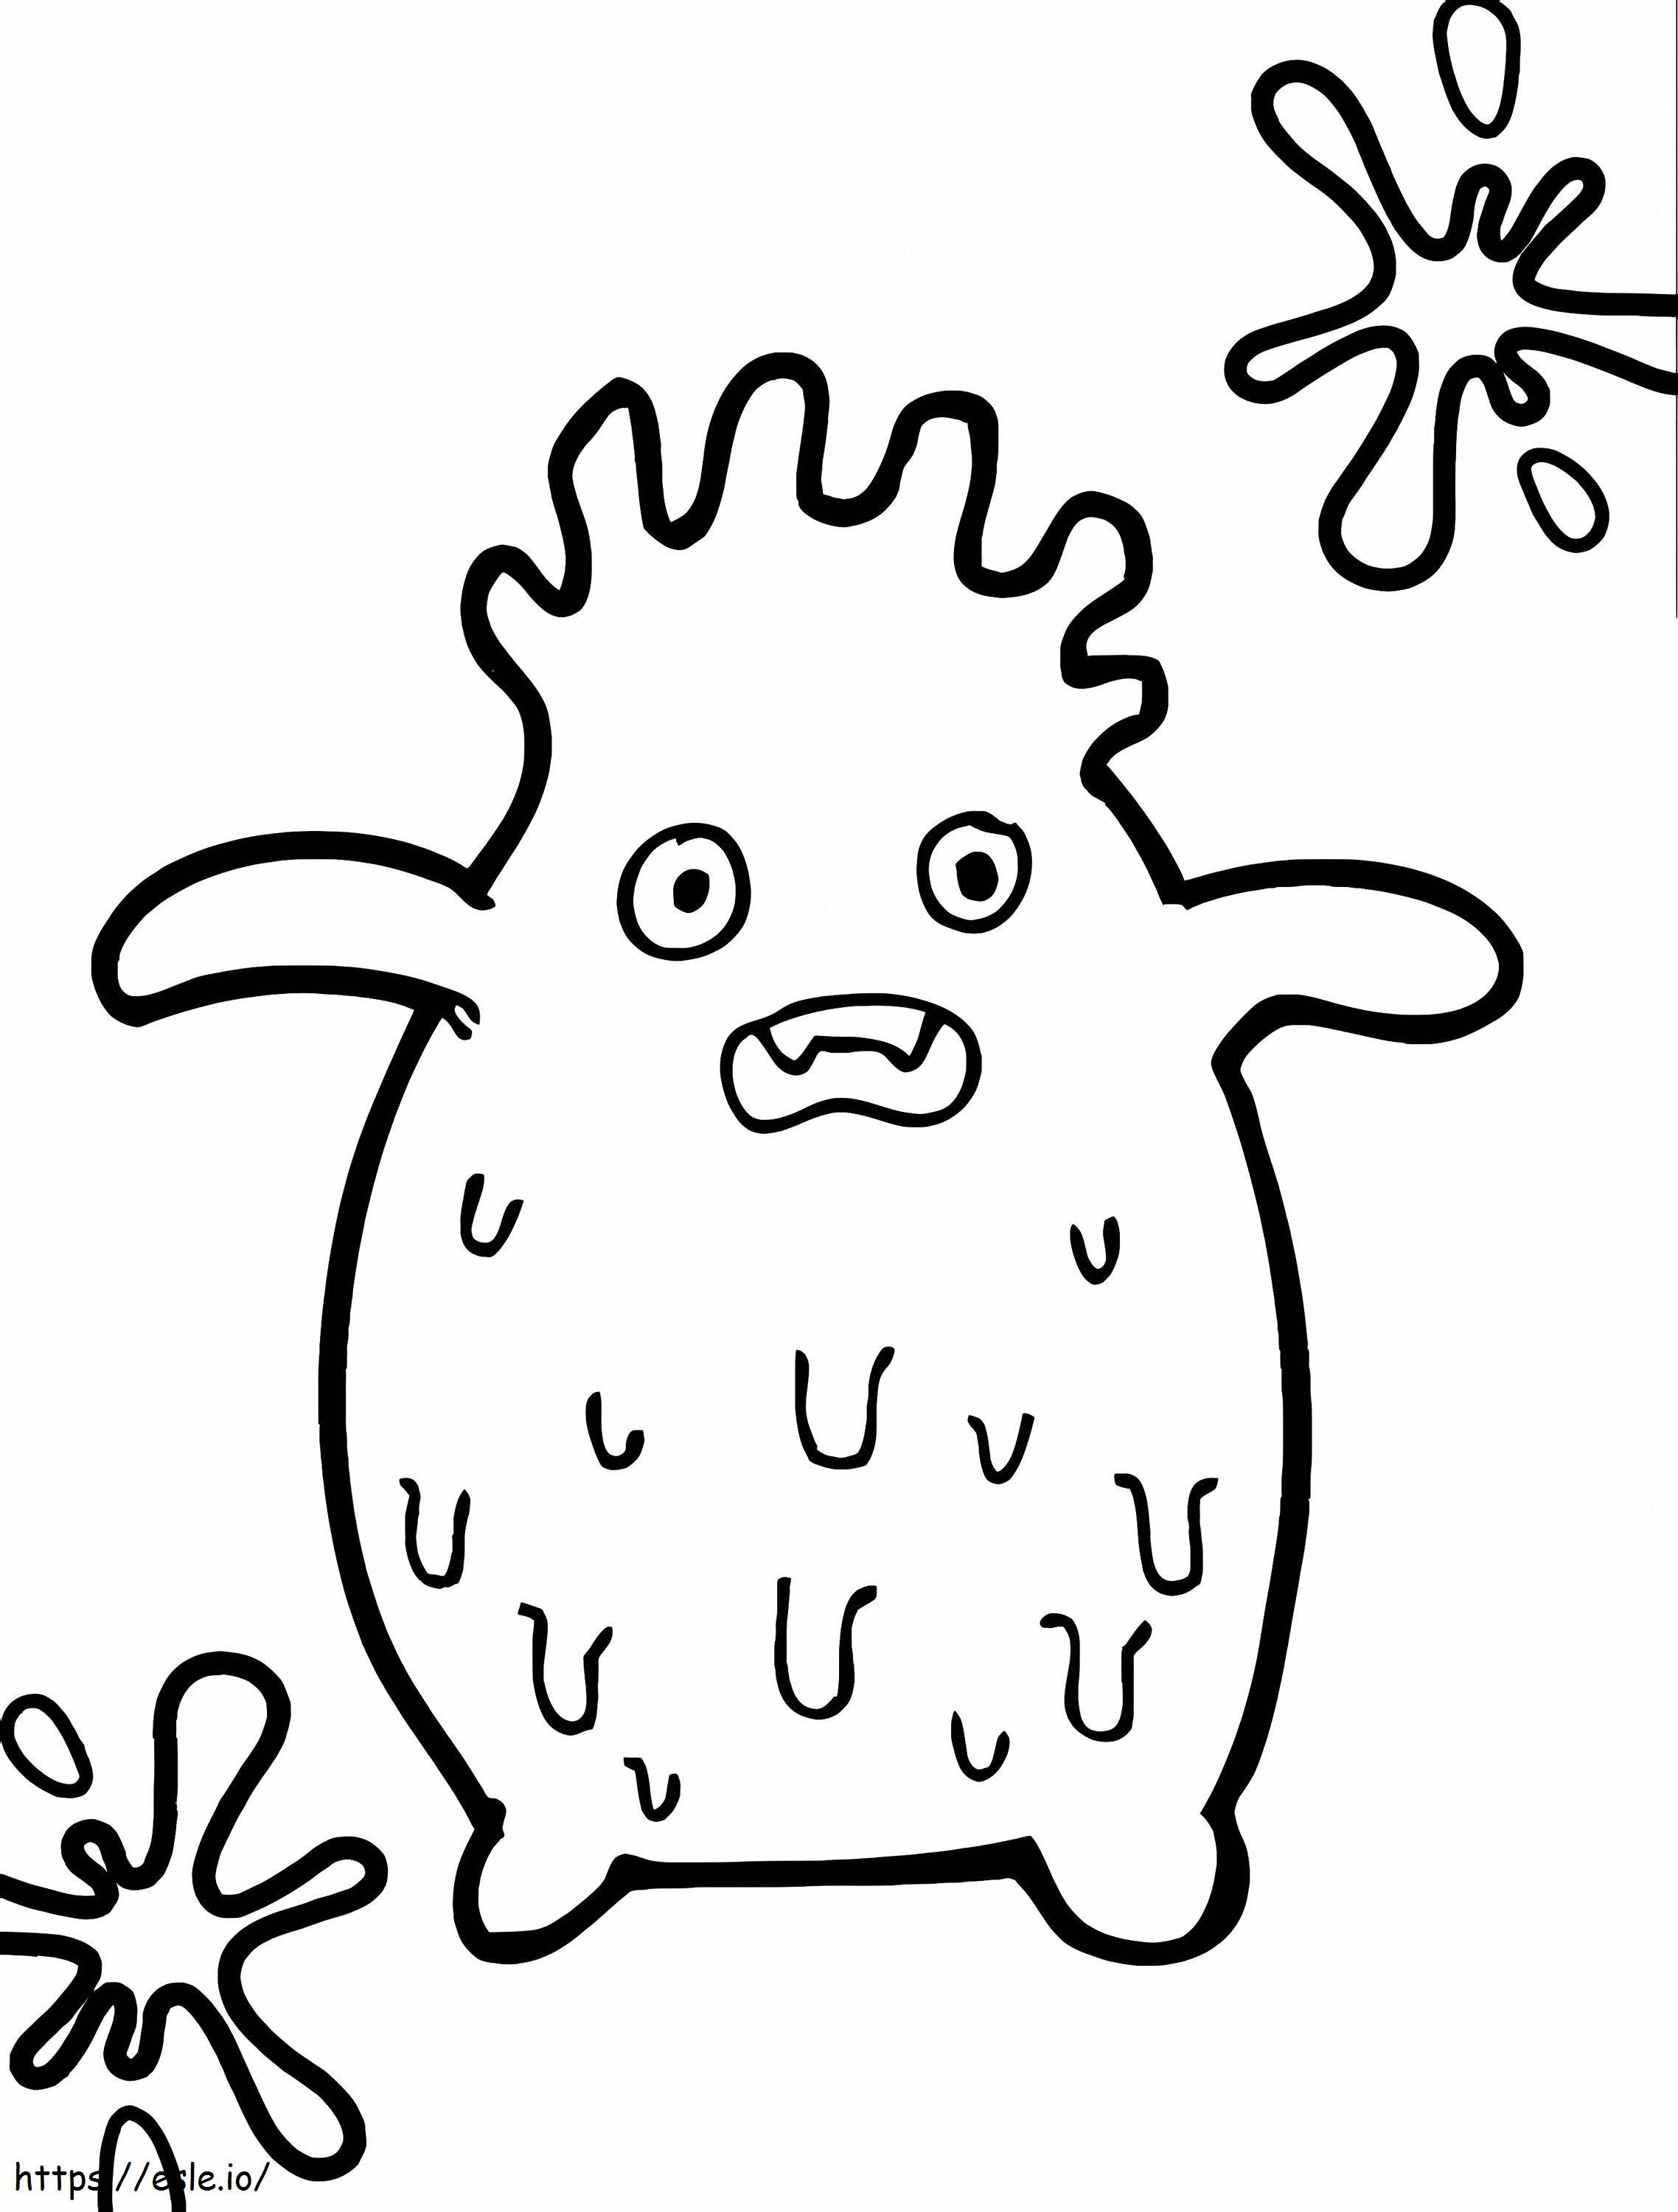 Slime Kids Coloring Page